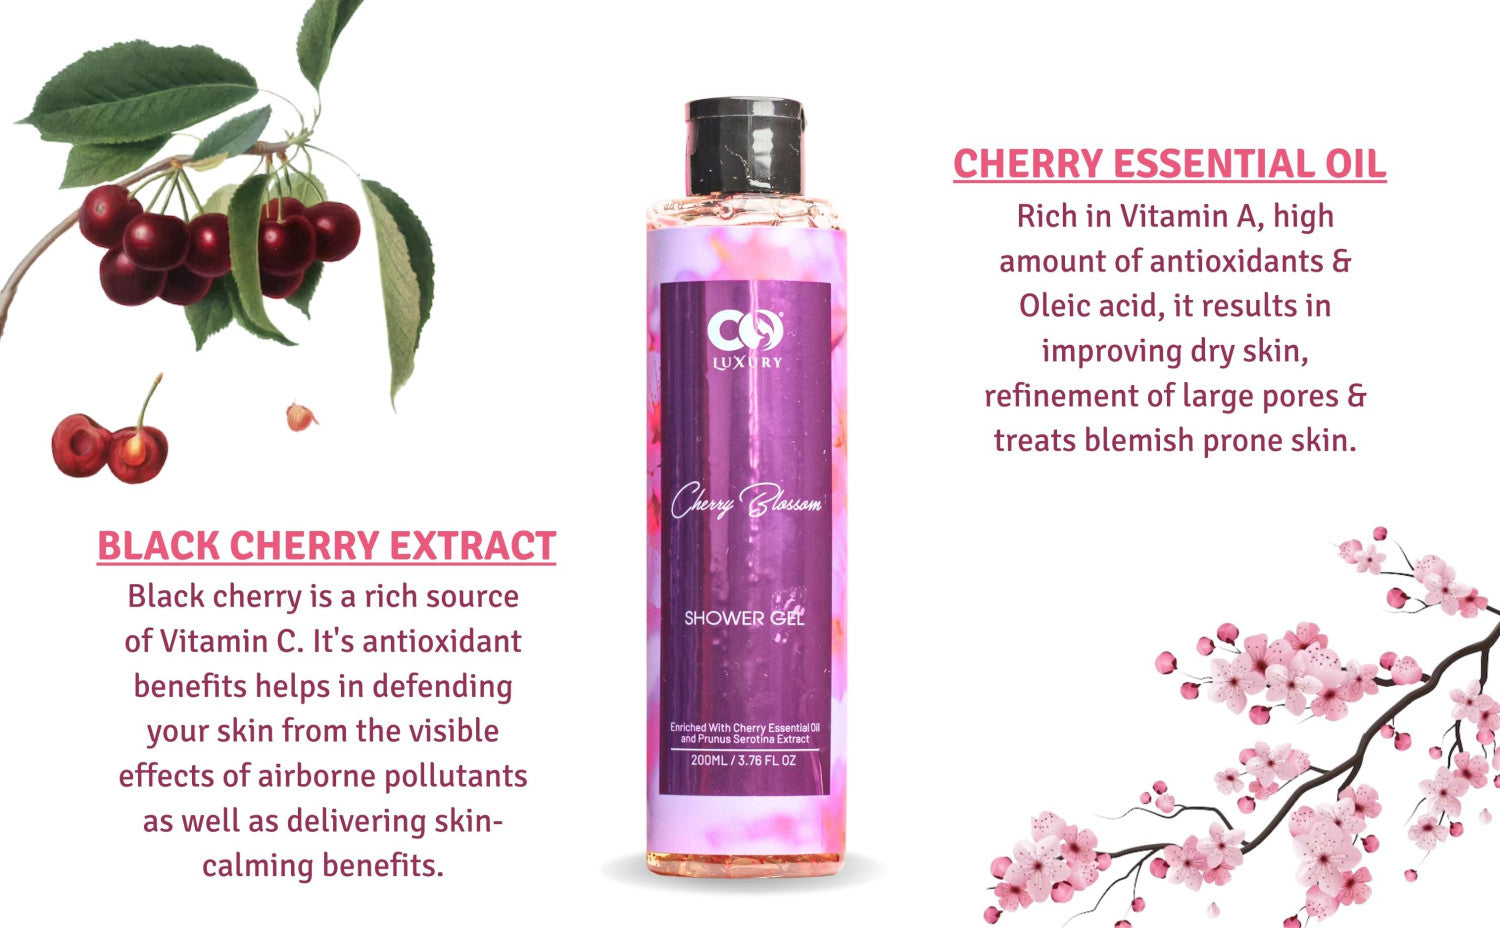 Co-Luxury Cherry Blossom Shower Gel with Kiwi Seed Oil & Vitamin E Beads